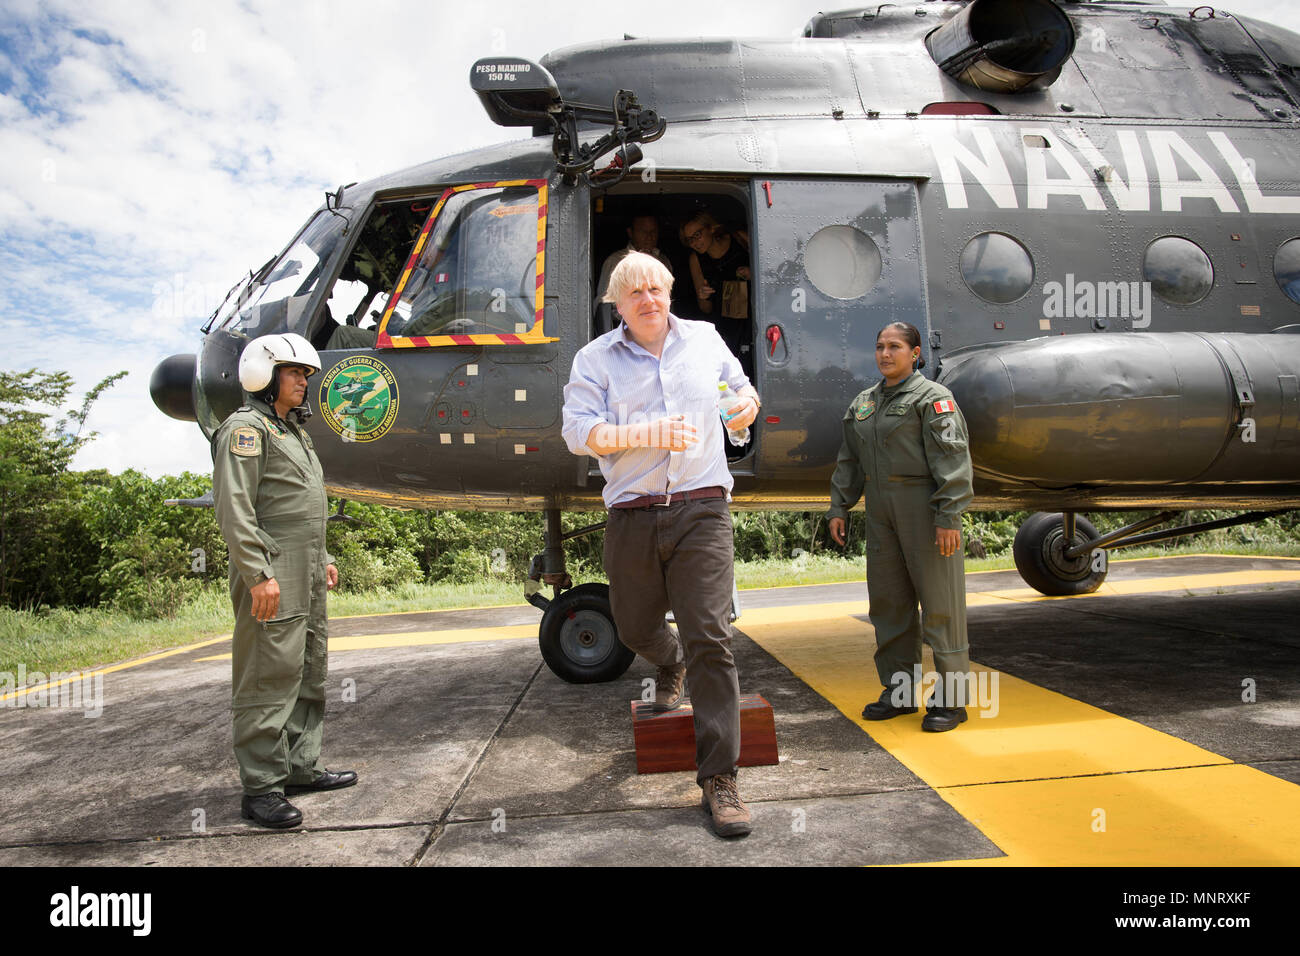 Foreign Secretary Boris Johnson disembarks a helicopter at the Nanay Naval Base on the Amazon river near Iquitos in Peru during a visit to meet members of the Peruvian armed forces who are trying to prevent the illegal wildlife trade. Stock Photo